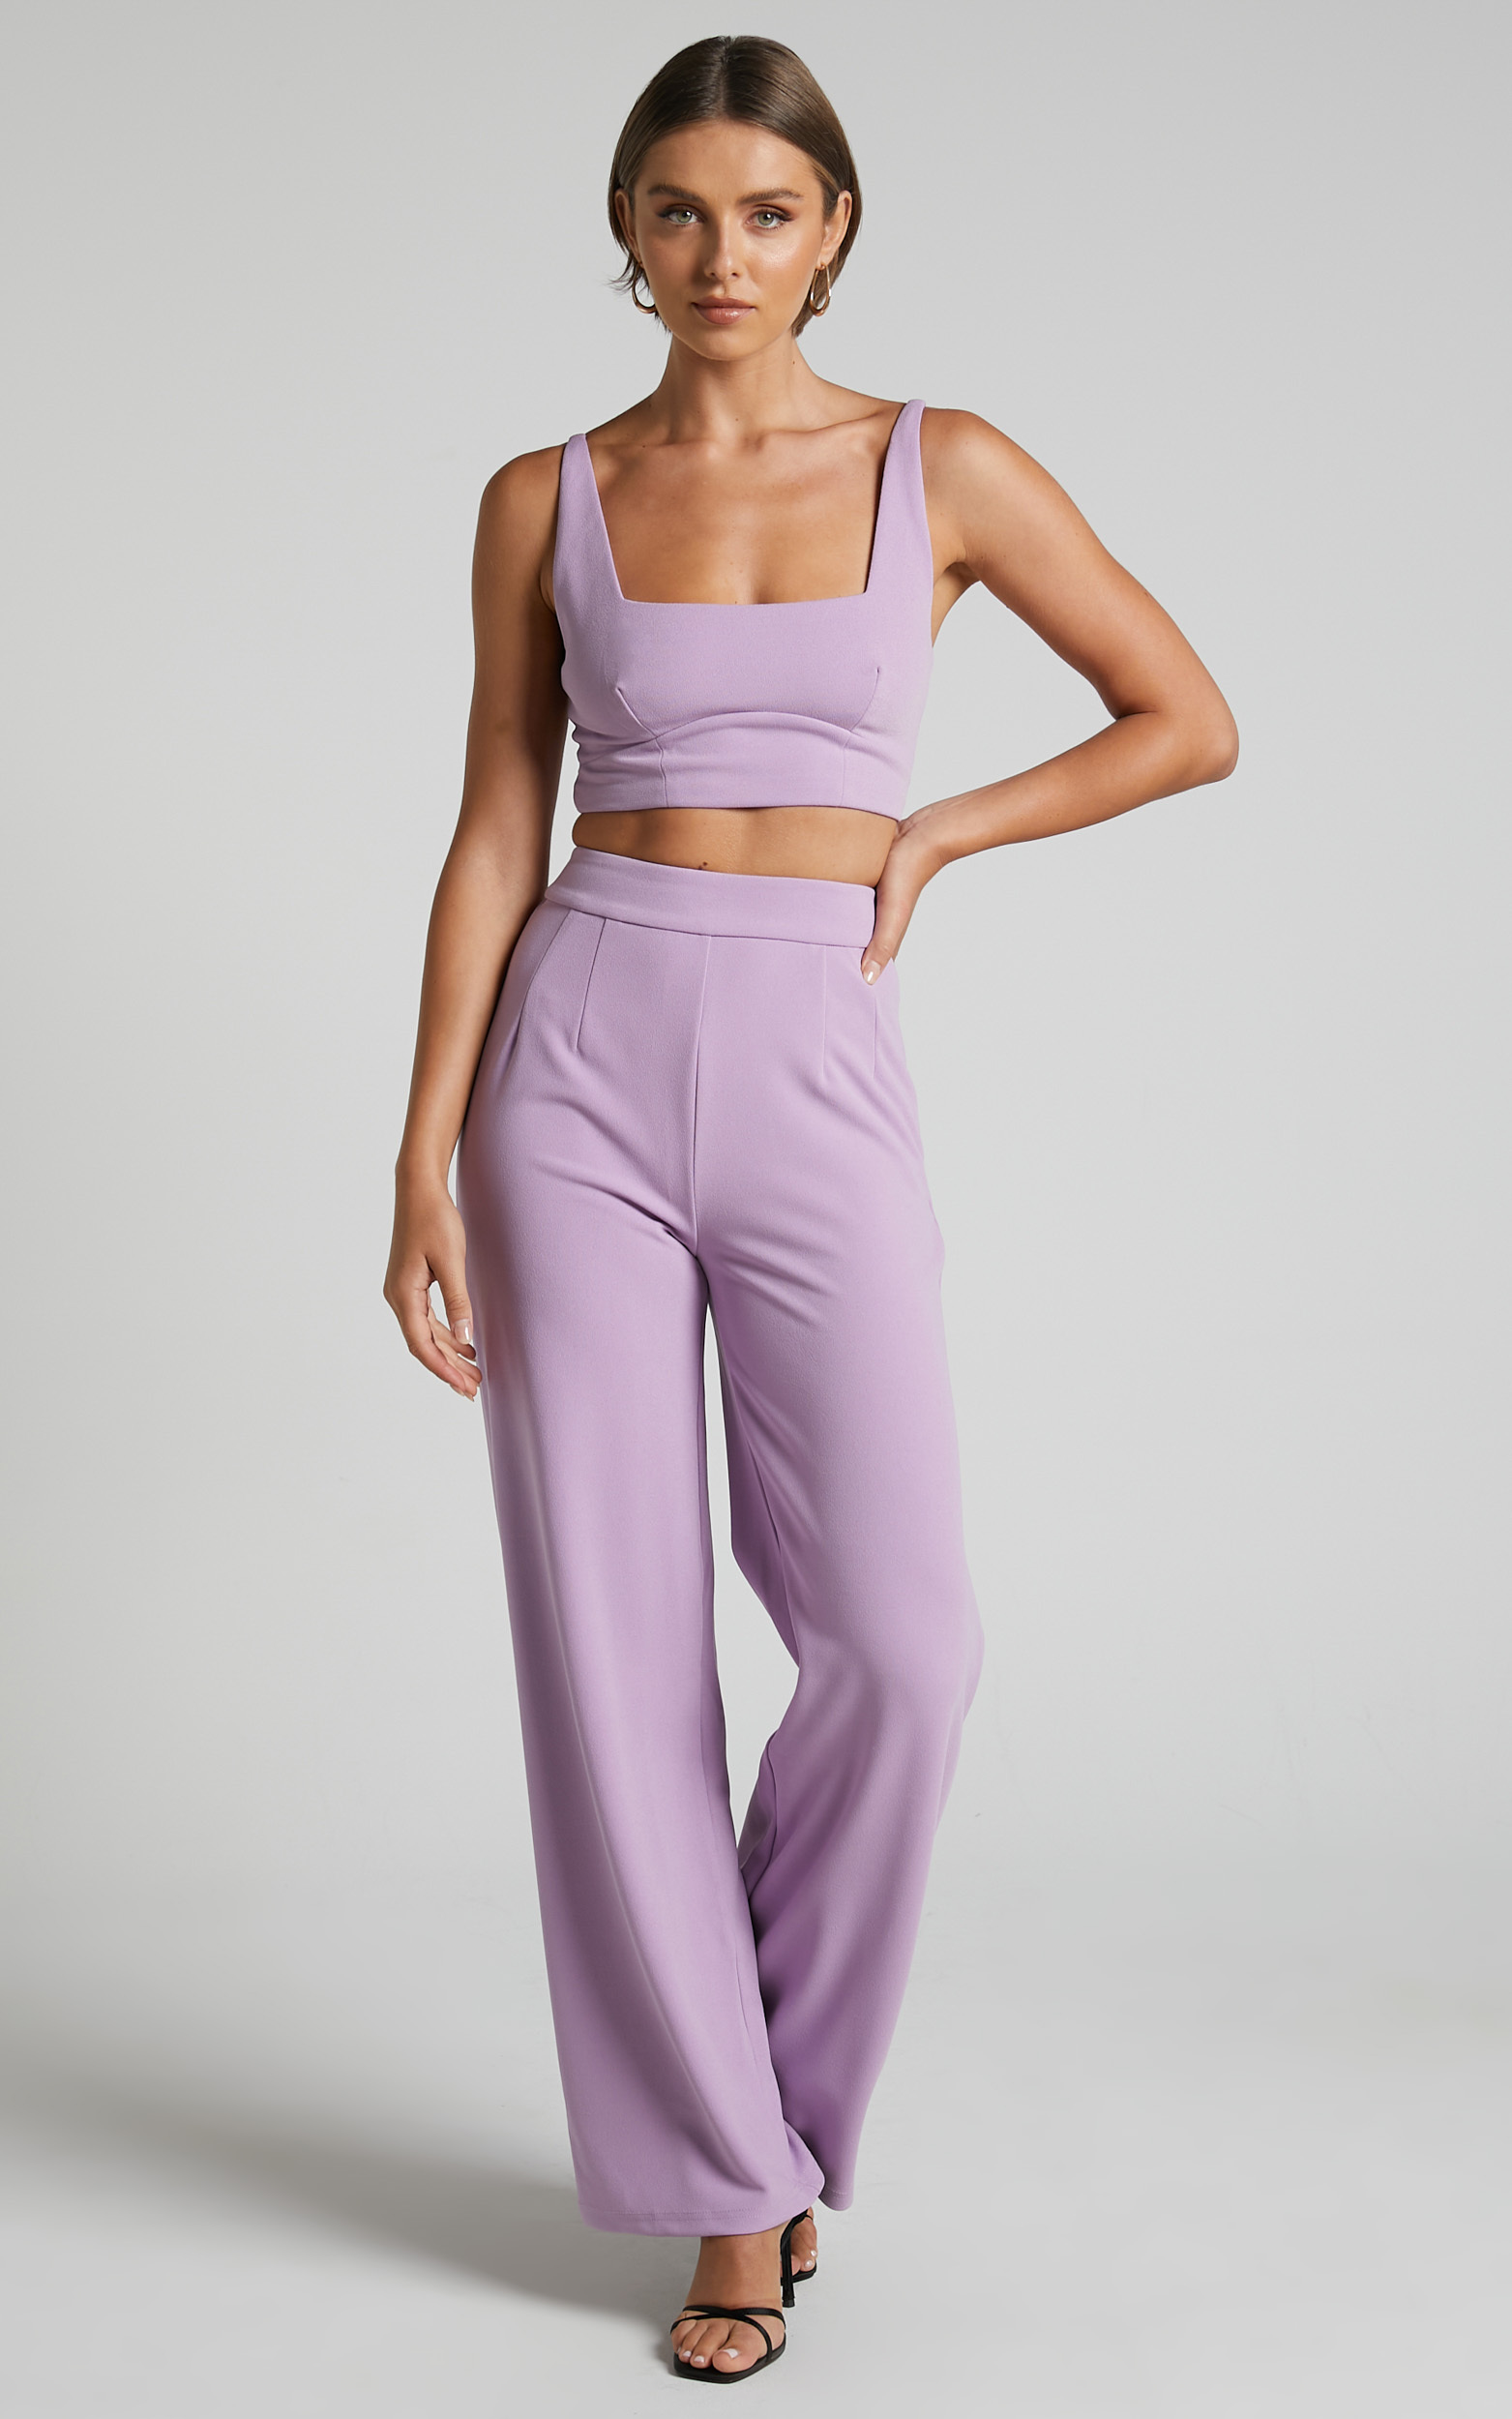 Elibeth Two Piece Set - Crop Top and High Waisted Wide Leg Pants in Lilac - 04, PRP5, hi-res image number null